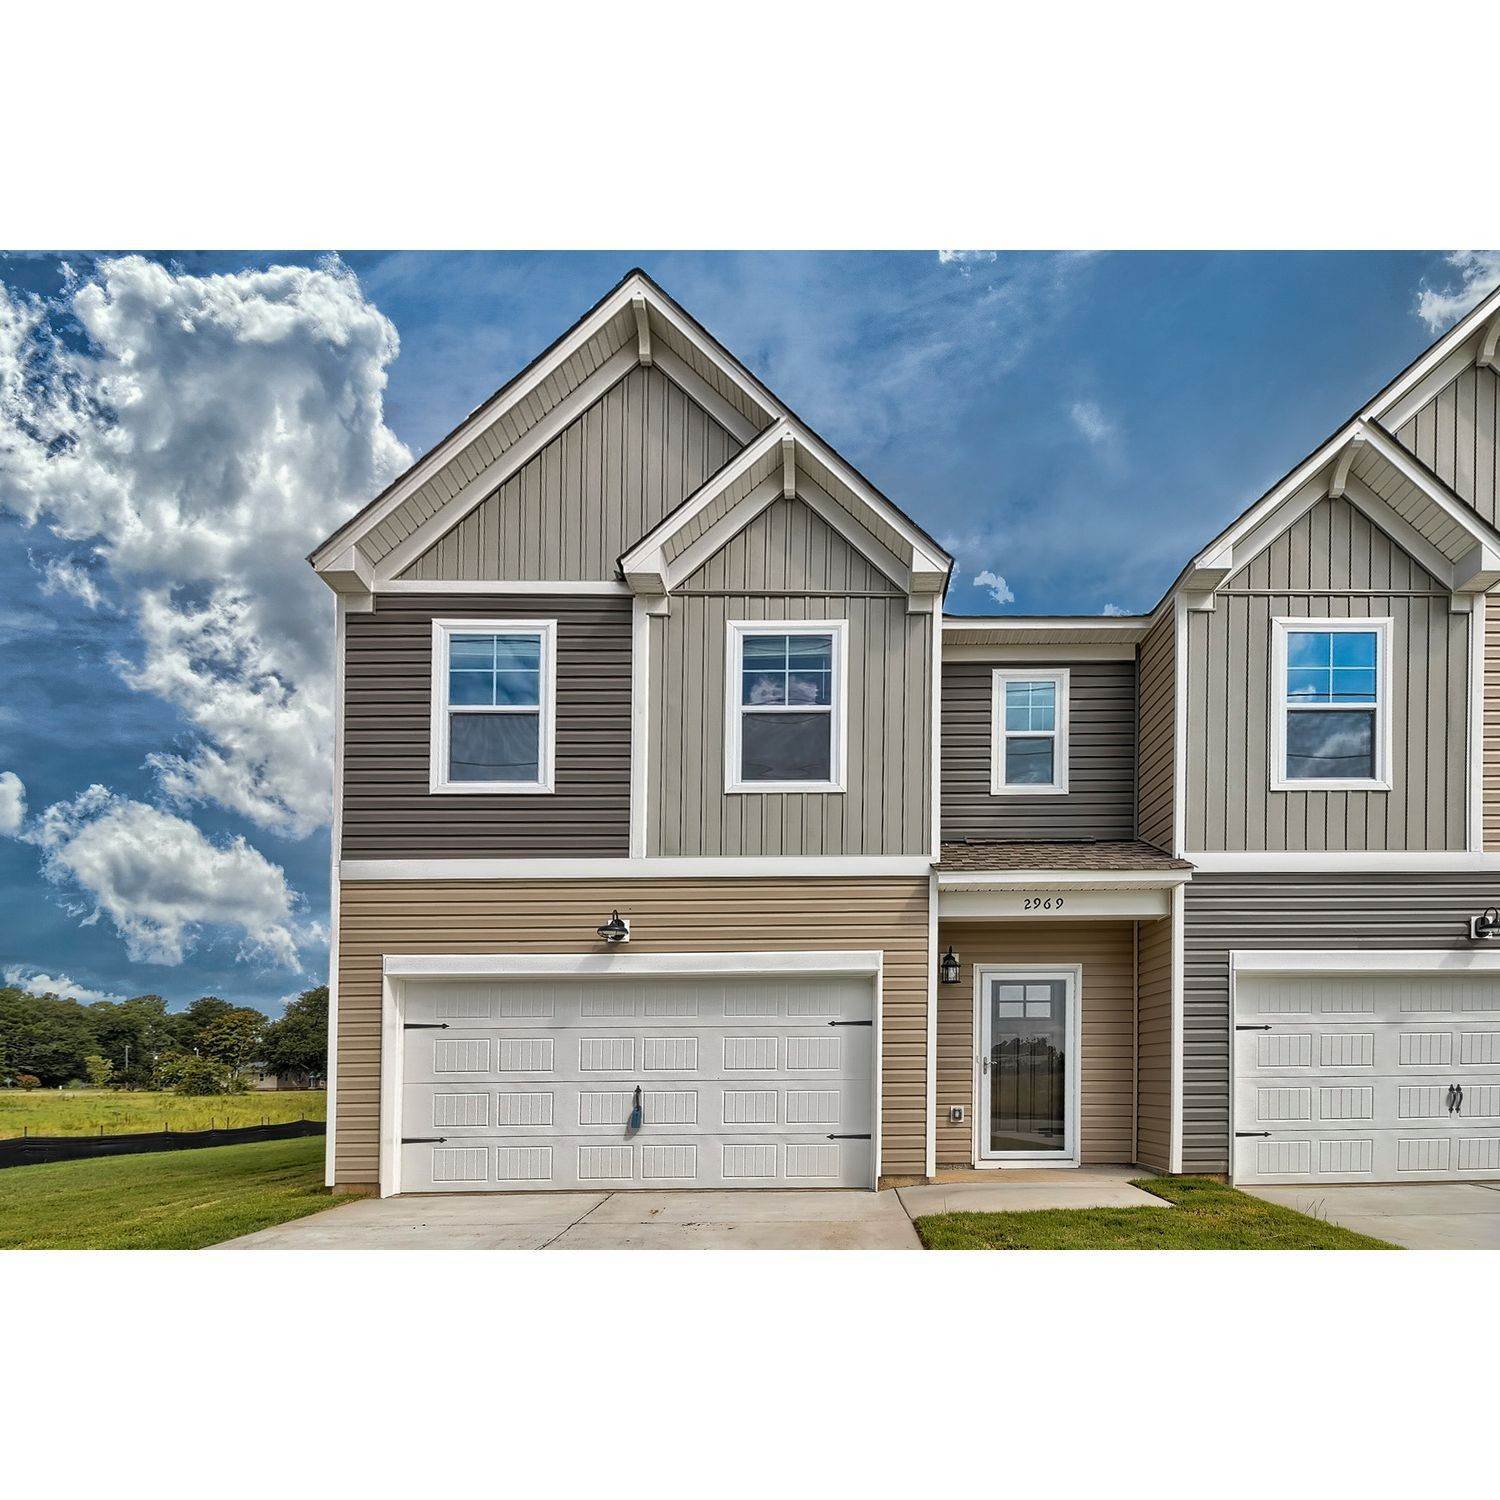 Townhomes at Pocalla Springs building at 1788 Snead Drive, Sumter, SC 29154